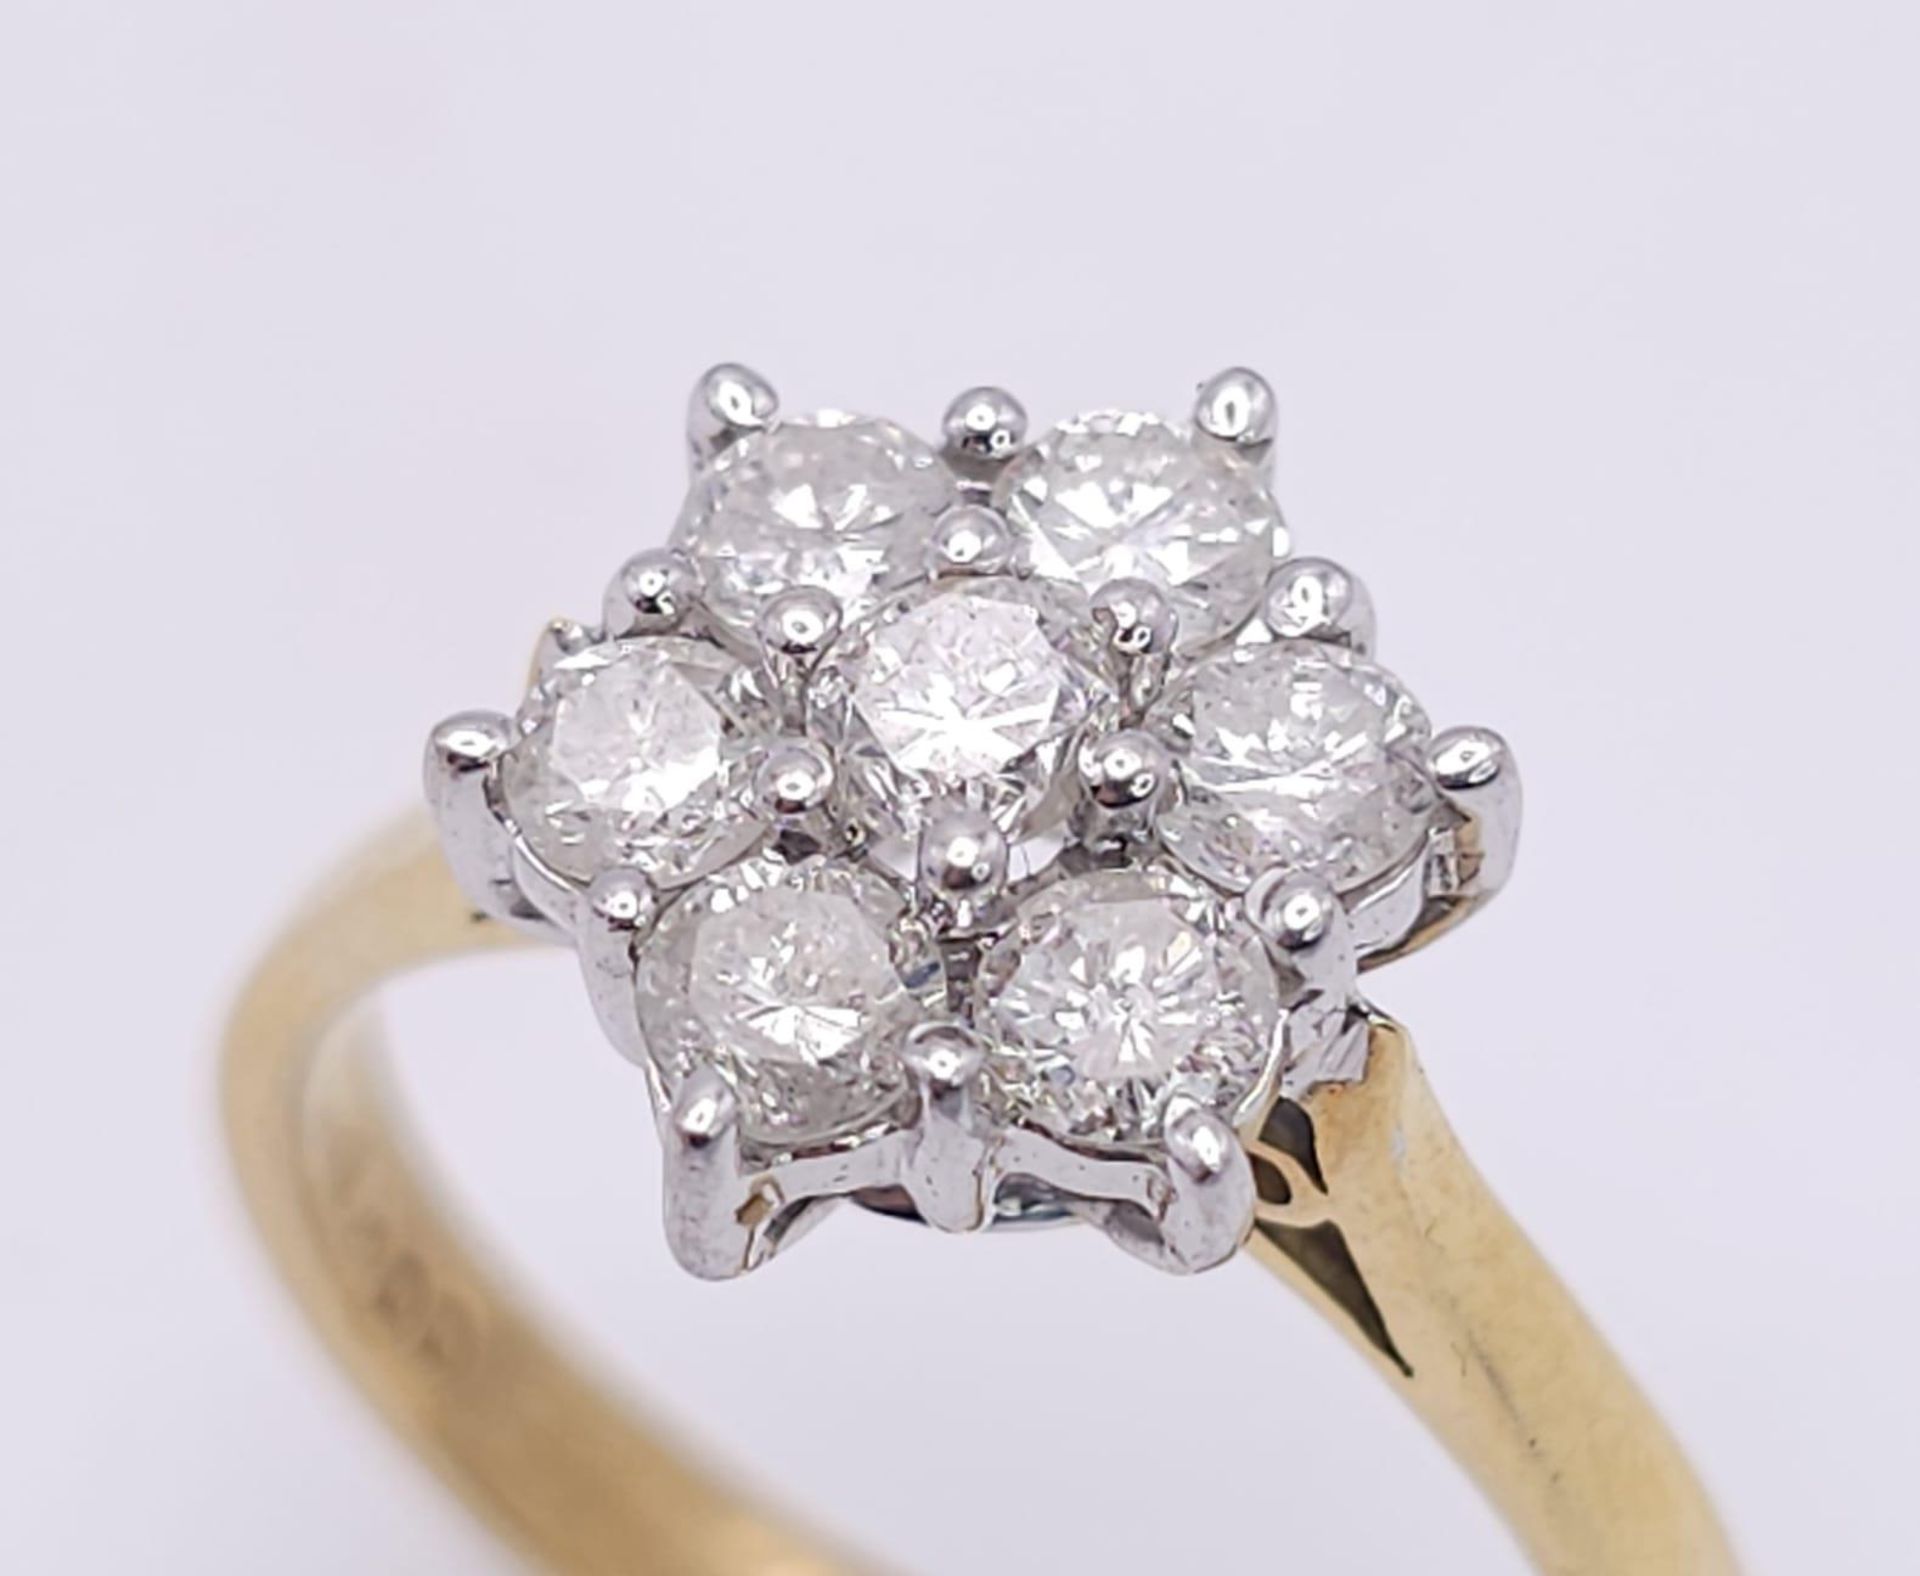 18K YELLOW GOLD DIAMOND CLUSTER RING WITH APPROX 1.05CT DIAMONDS IN FLORAL DESIGN, WEIGHT 4.6G - Image 3 of 7